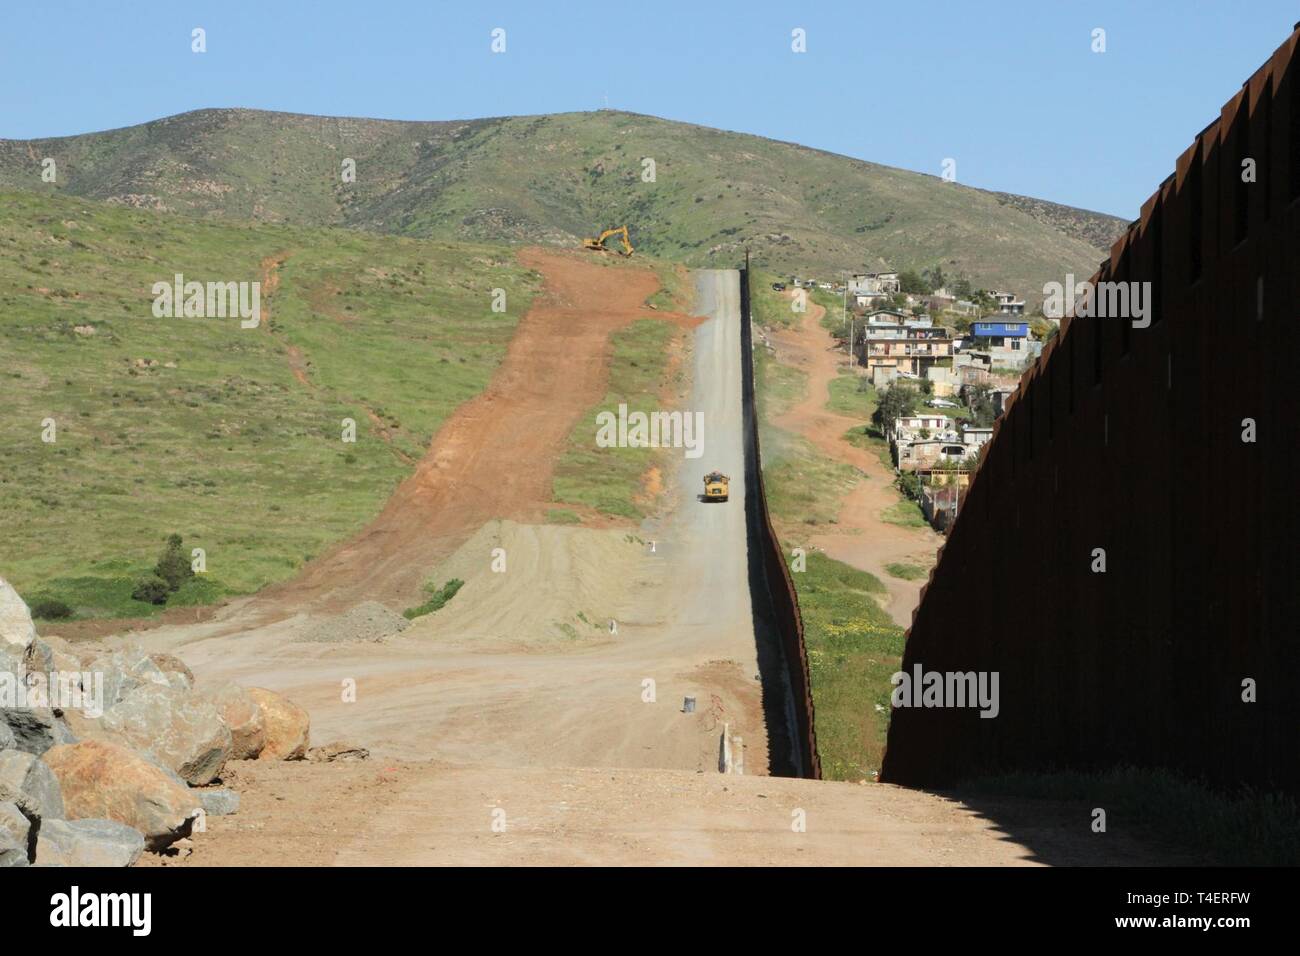 A view of the existing San Diego primary border wall (right) with 'Tin Can Hill' in the background, and the cleared terrain for the San Diego secondary border wall (left) on March 28, 2019.  The Corps is supporting the Department of Homeland Security's request to build additional border wall near San Diego. Stock Photo